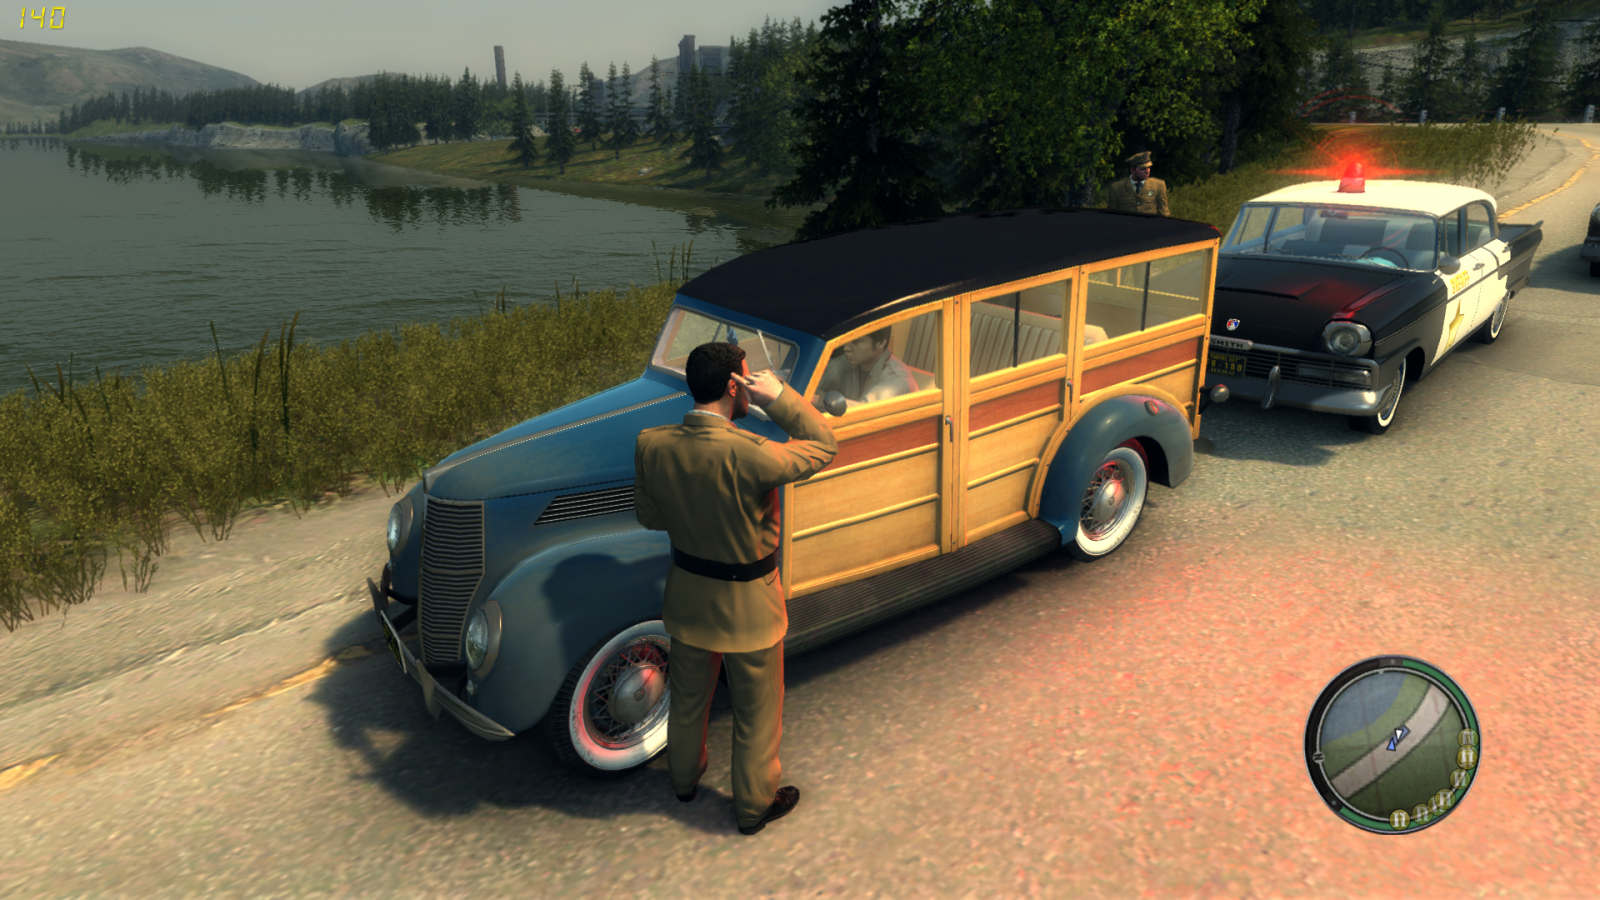 Top mods at Mafia 2 - Mods and community